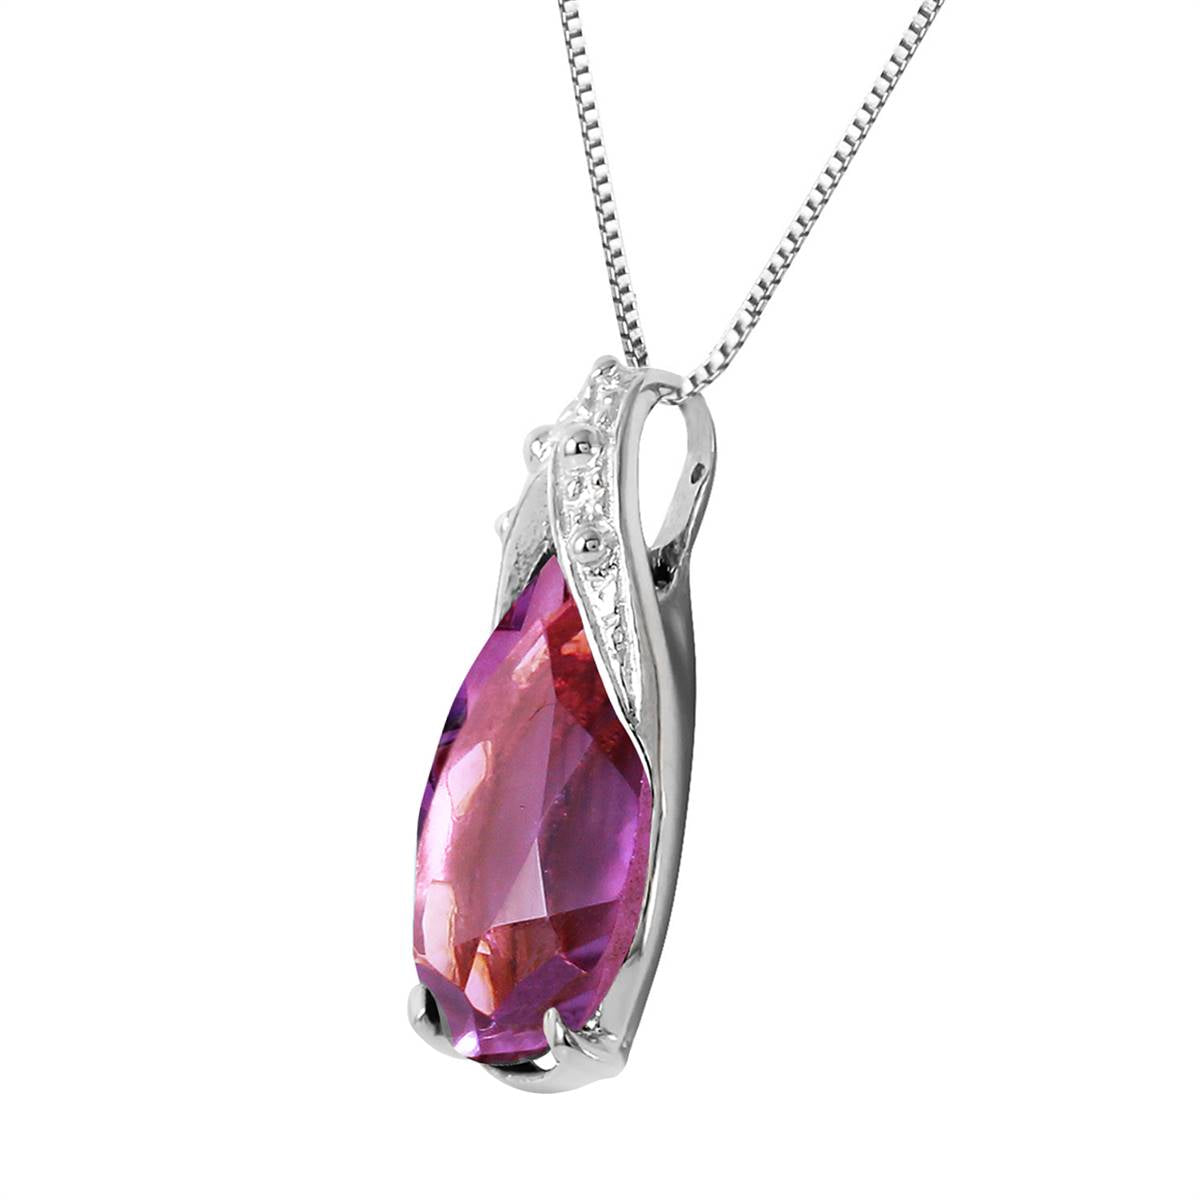 5 Carat 14K Solid White Gold Evening Wind Amethyst Necklace